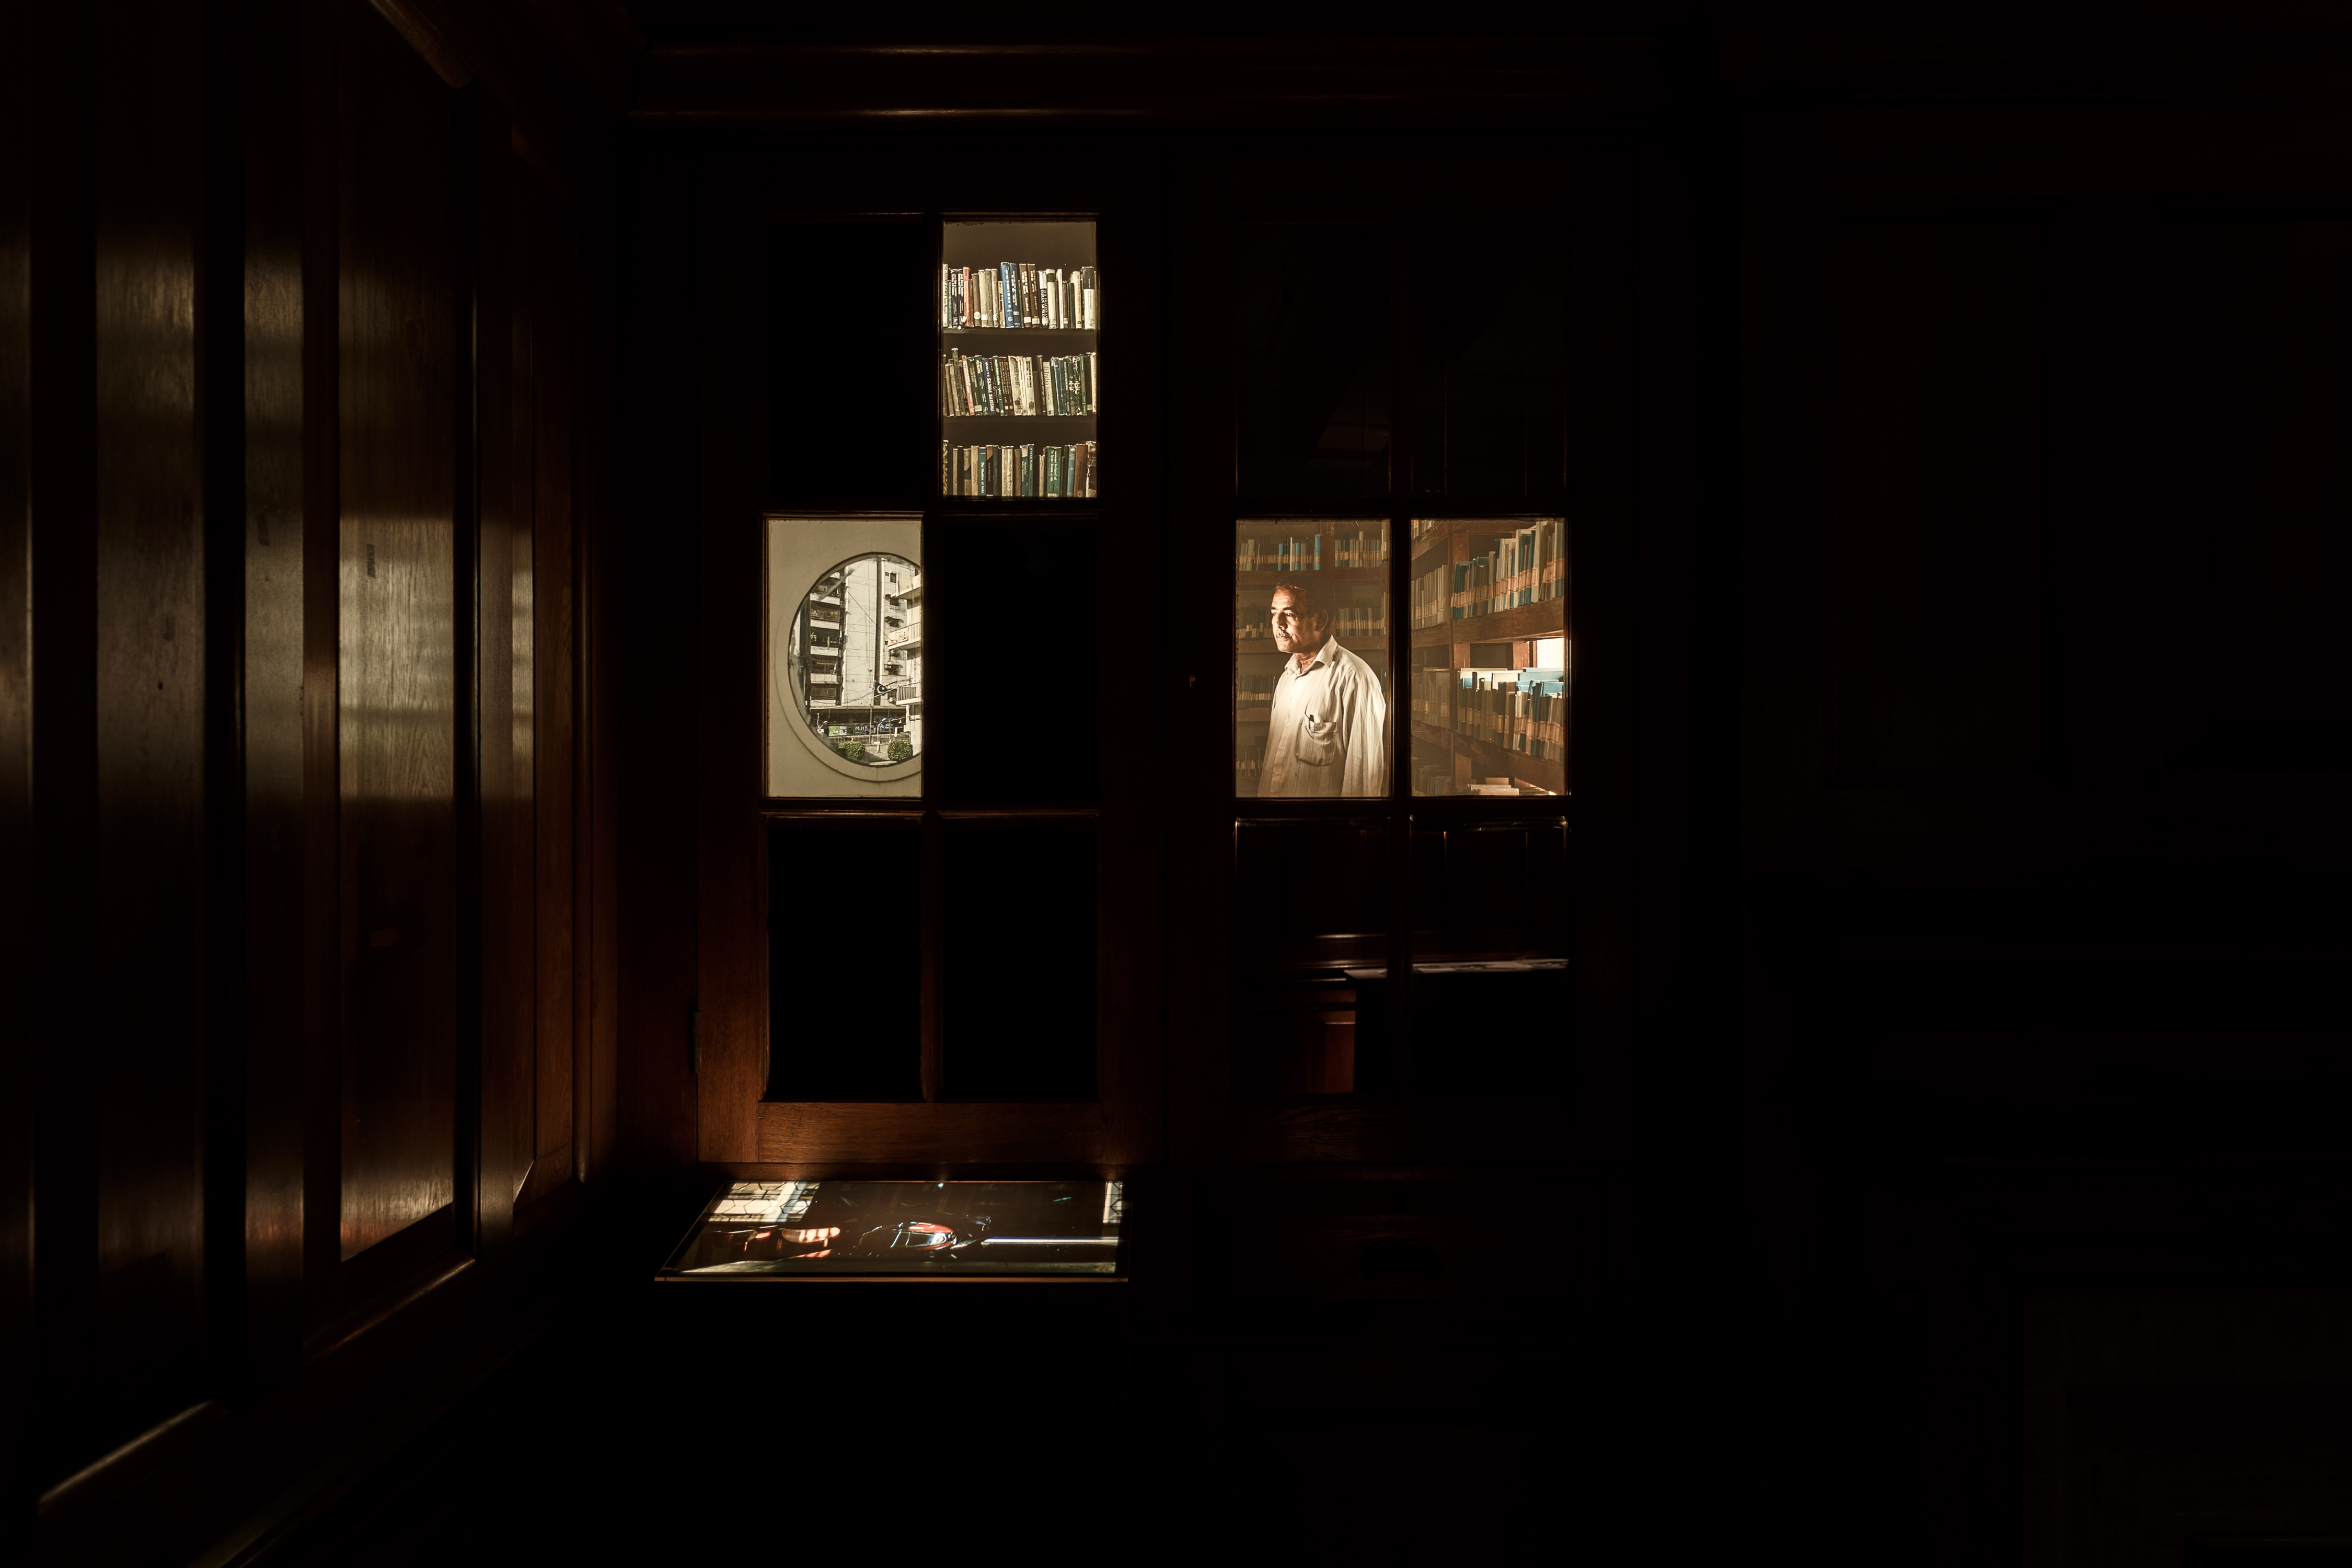 A darkened room with three artist's films showing a man, some bookshelves and a view through a round window.